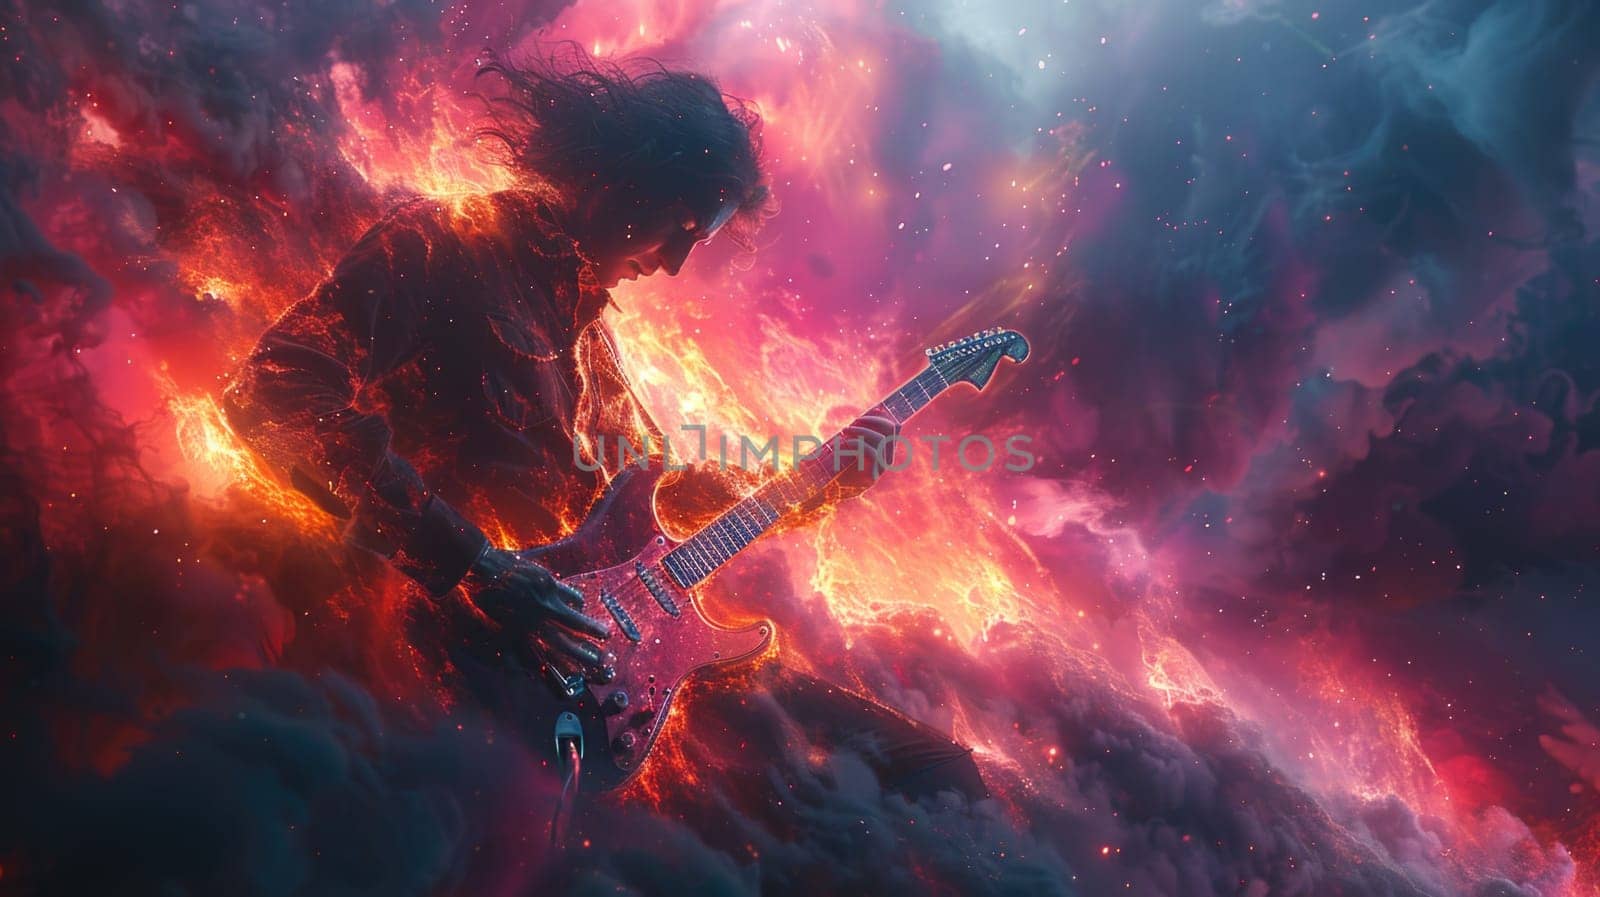 Musician Performing Electric Guitar With Colorful Background by but_photo